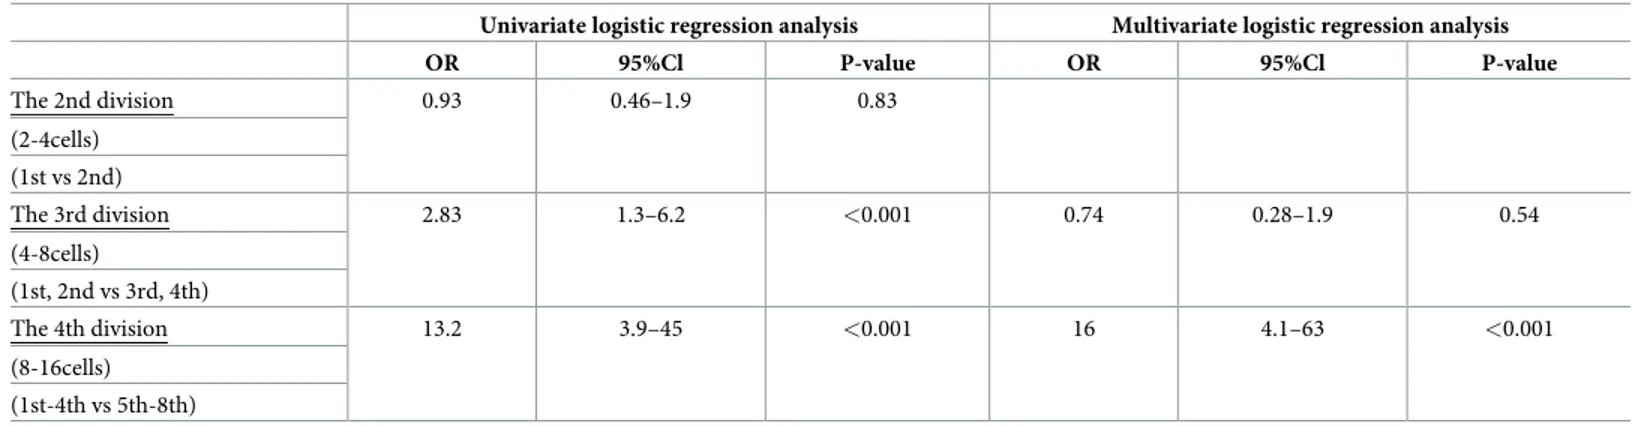 Table 1. Univariate and multivariate logistic regression analyses with the attainment of ICM defined as the endpoint.